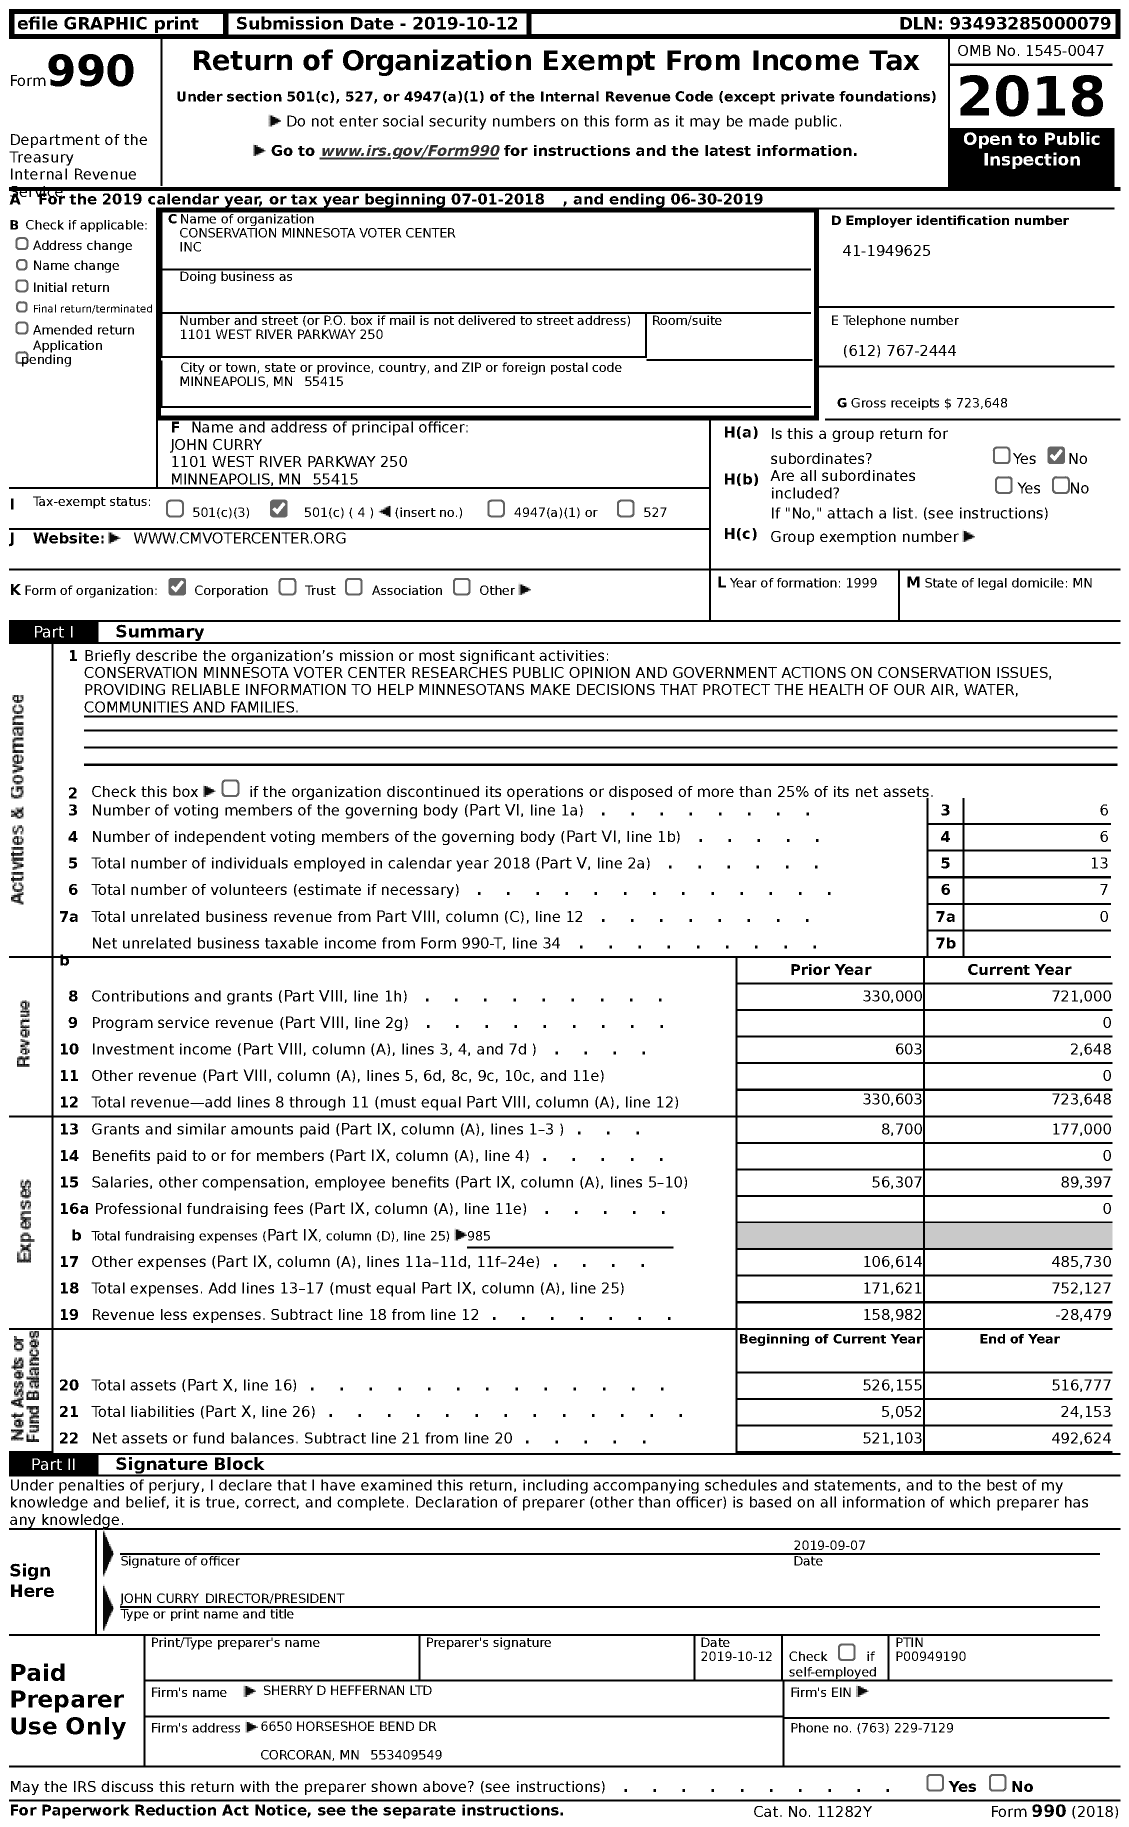 Image of first page of 2018 Form 990 for Conservation Minnesota Voter Center